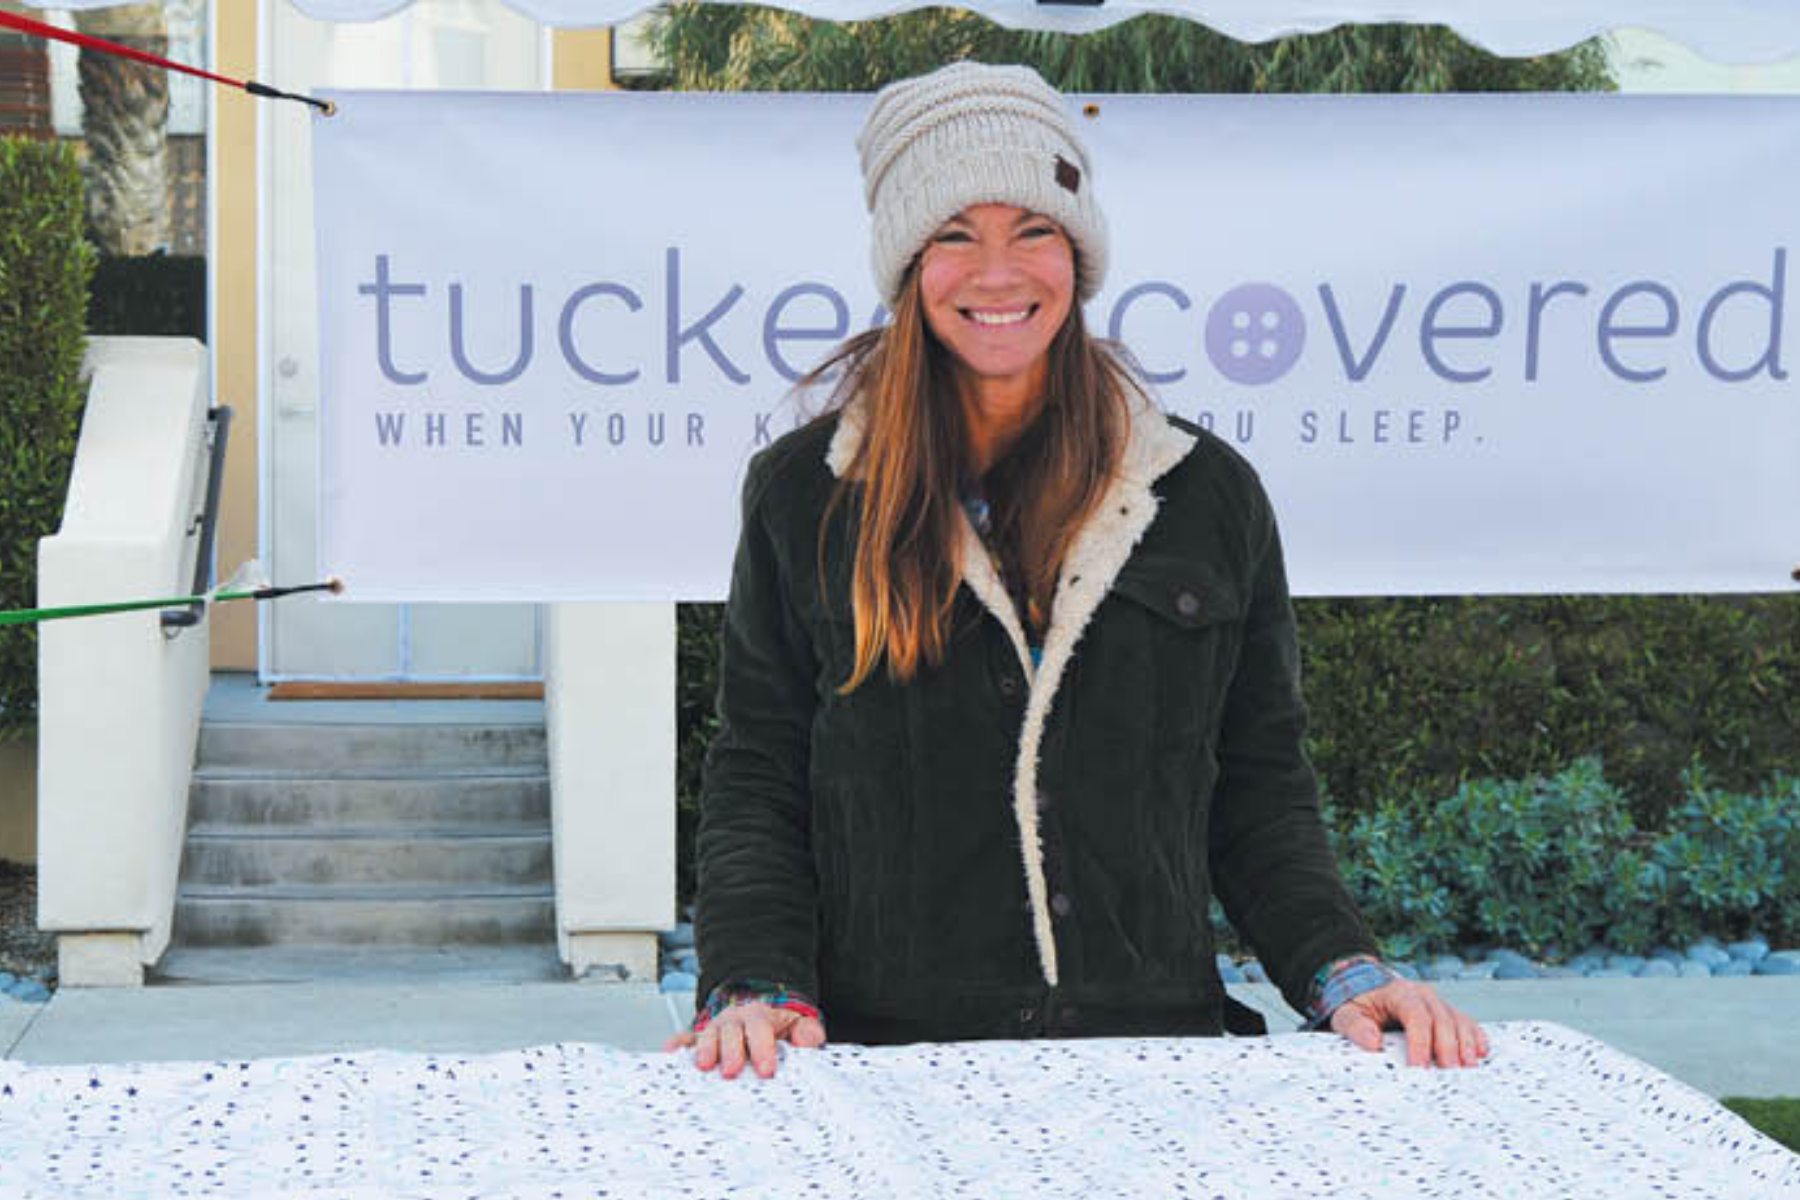 Business Spotlight: Playa Vista mom hopes to bring families a restful night’s sleep with Tucked + Covered